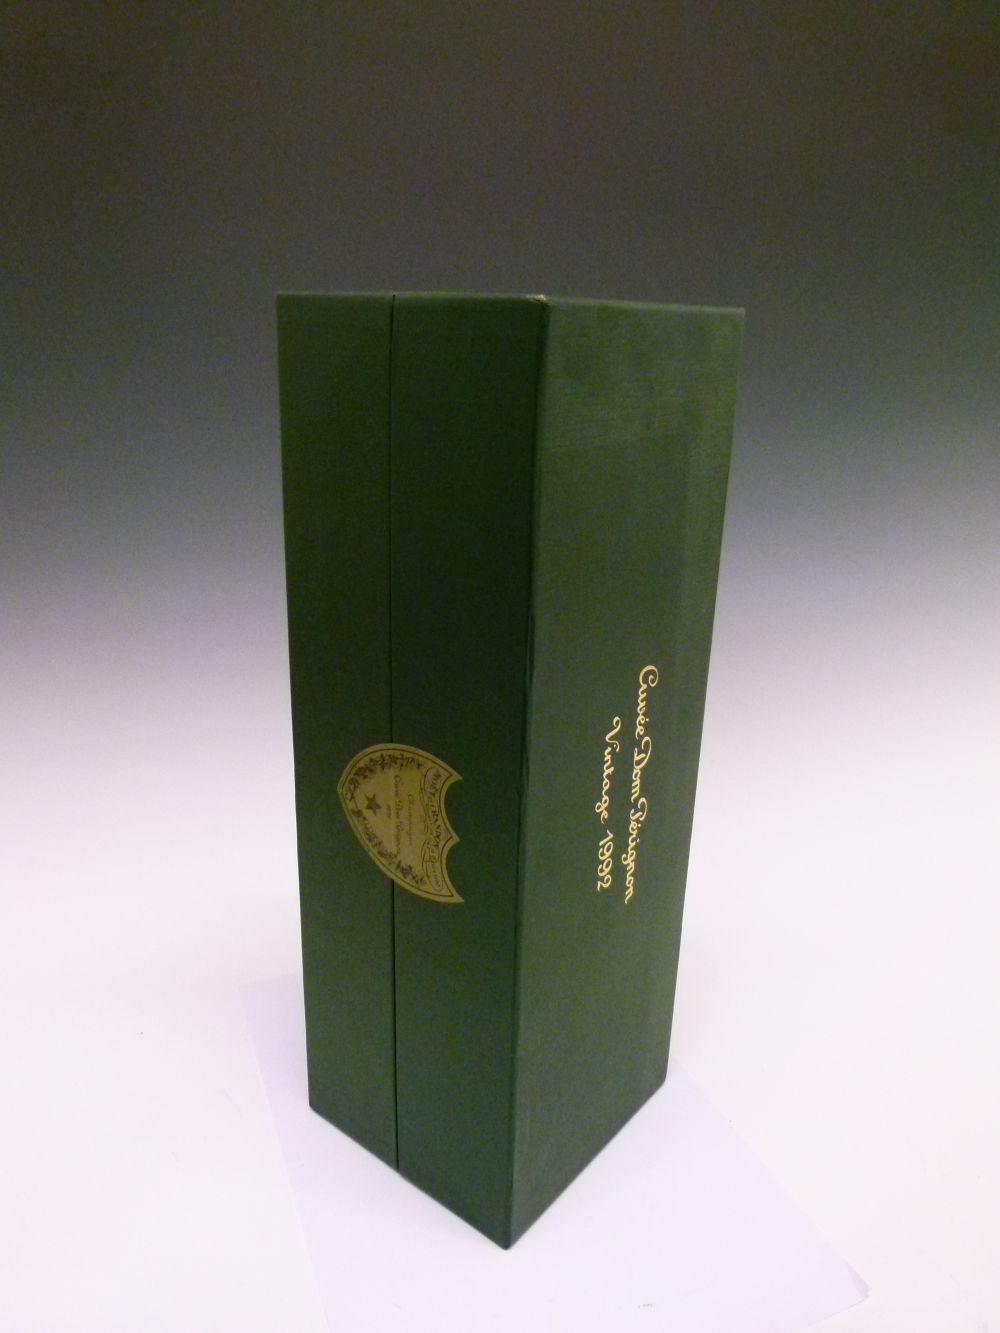 Magnum of Dom Perignon Champagne, 1992 vintage, in sealed presentation box (1) Condition: Box is - Image 2 of 6